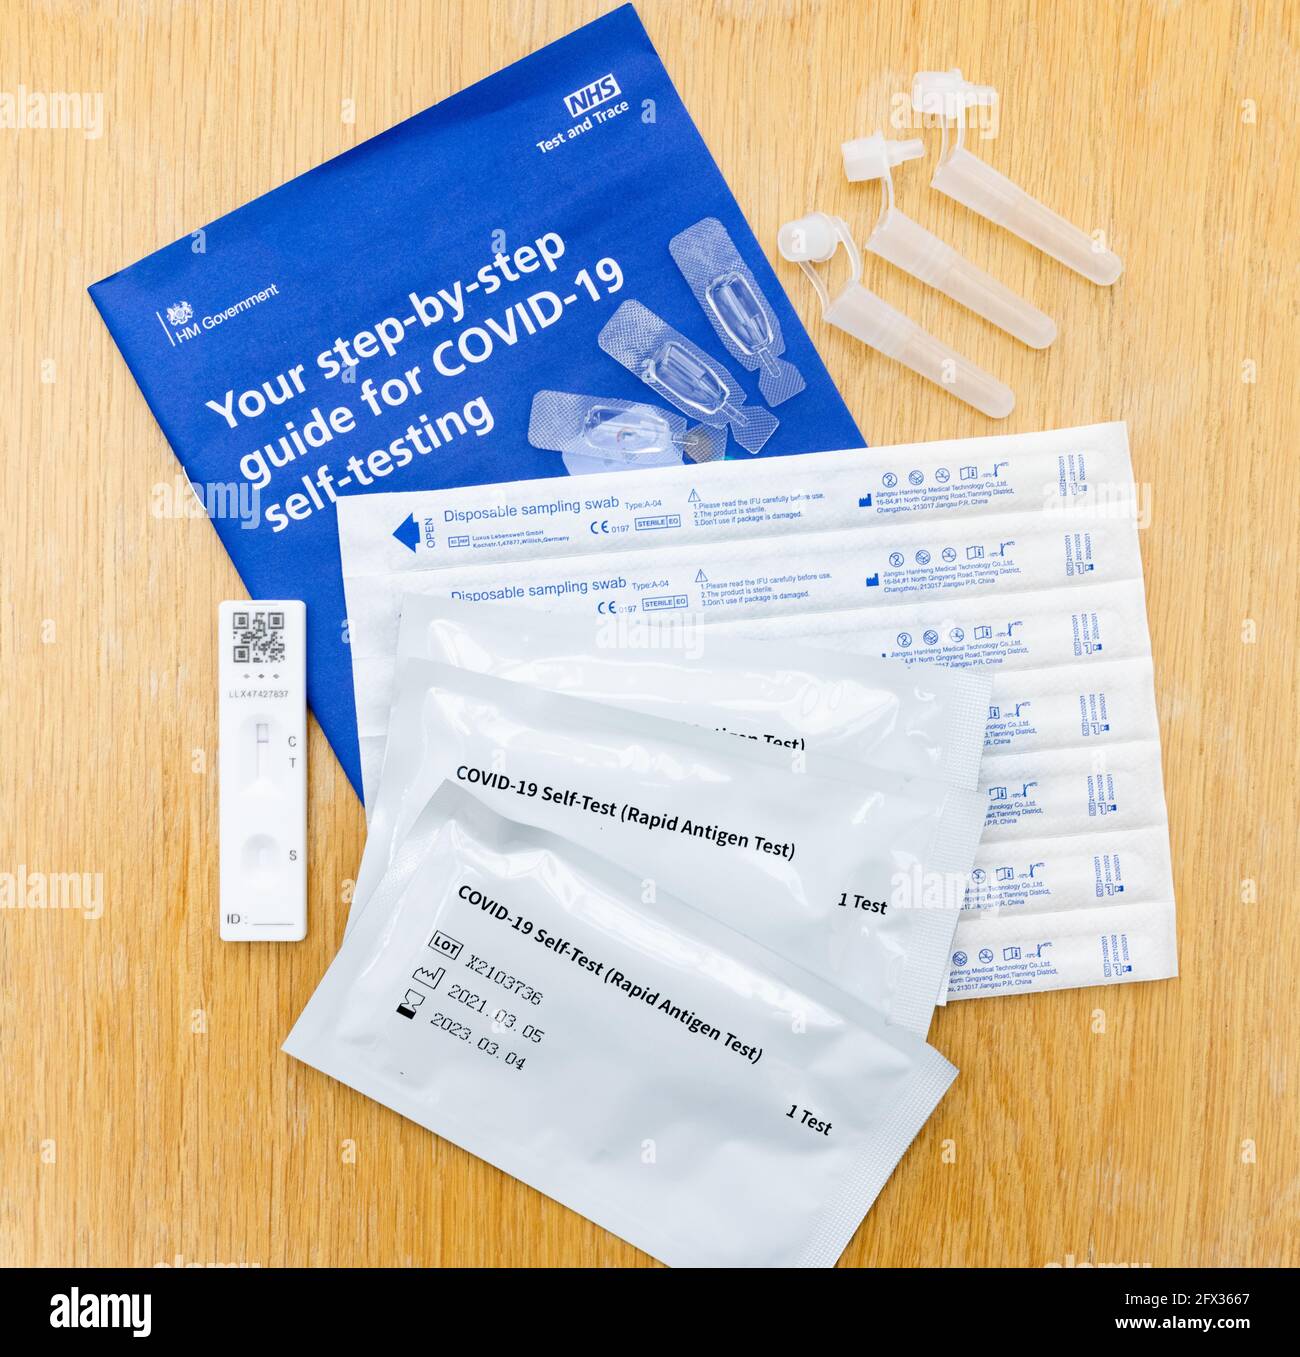 Selection of contents from an NHS Test and Trace Covid 19 Self Test Rapid Antigen Test kit used for home testing for the Coronavirus disease Stock Photo